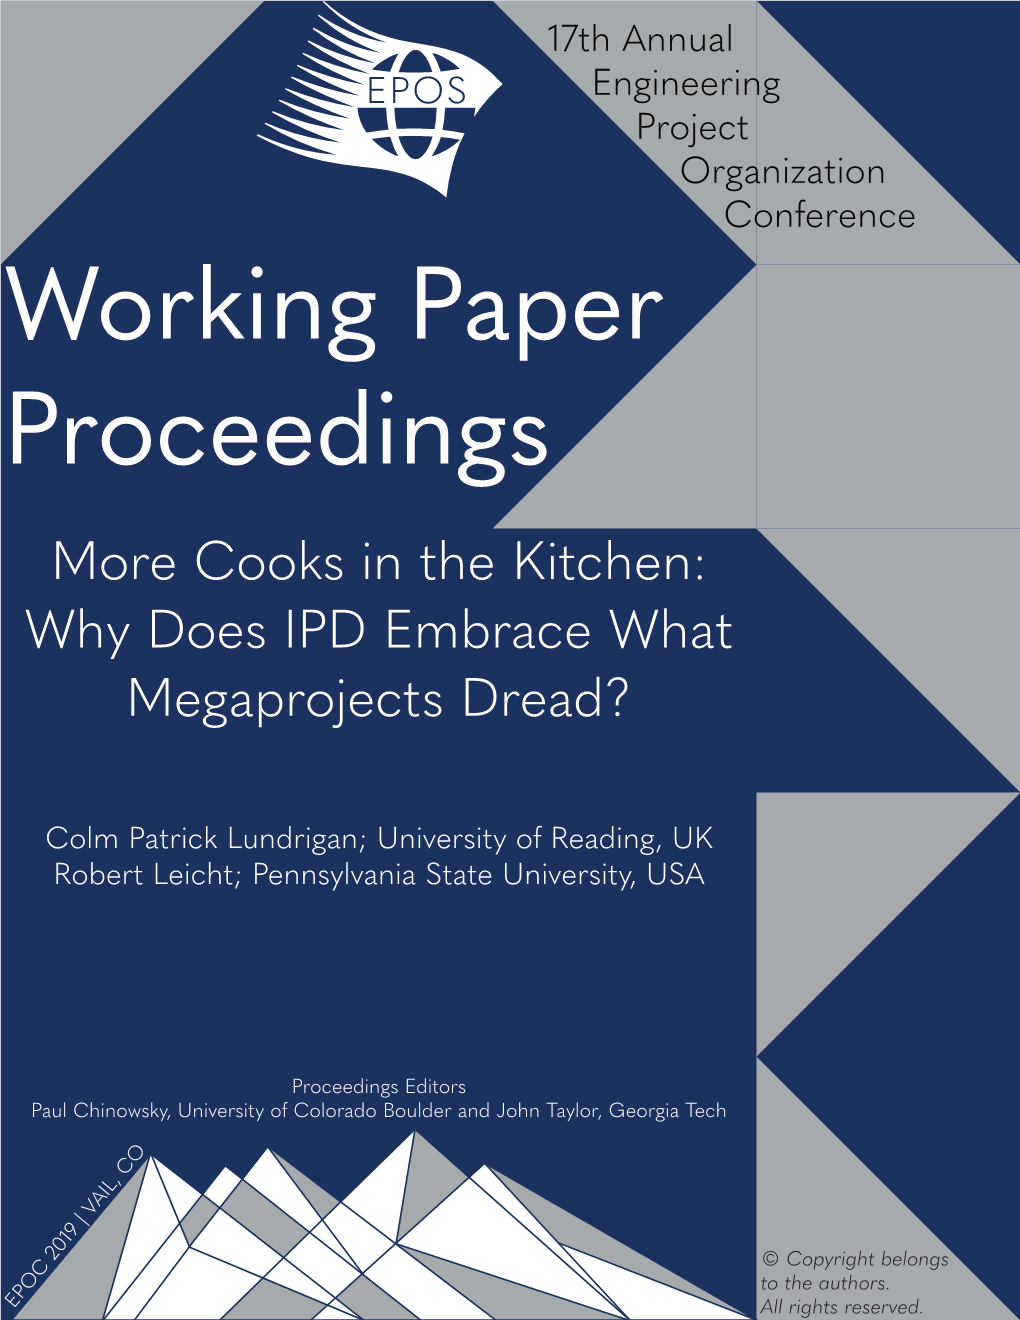 Working Paper Proceedings More Cooks in the Kitchen: Why Does IPD Embrace What Megaprojects Dread?